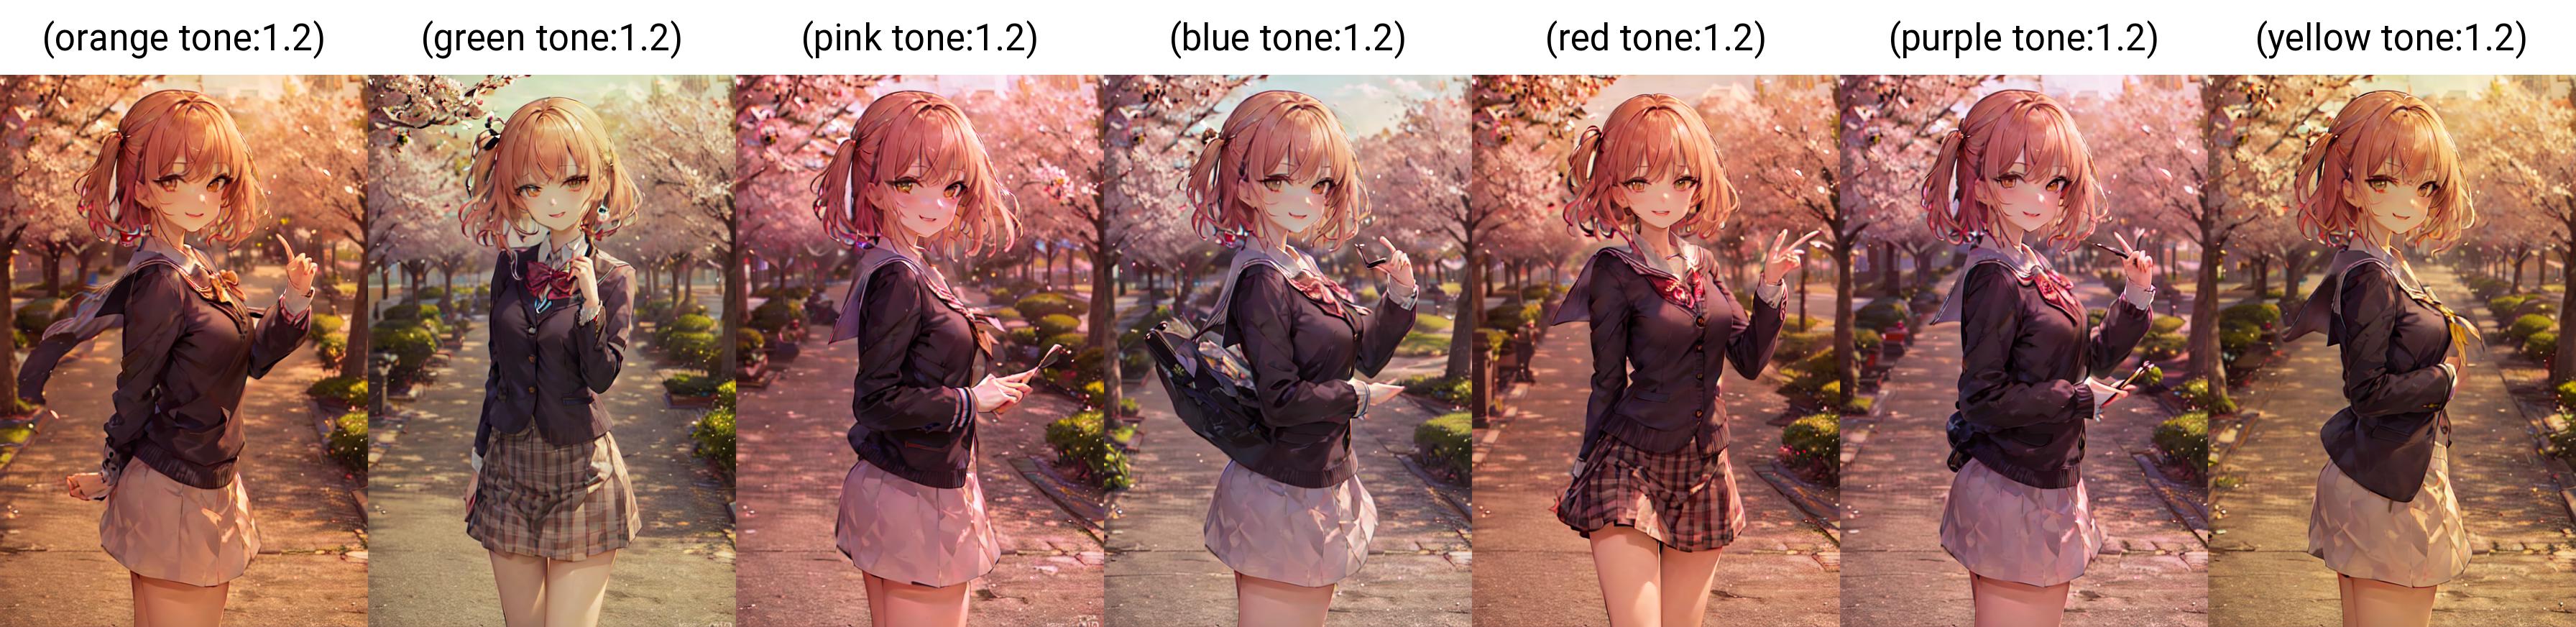 Color tone control / 画面色调控制 LoRA image by TLME